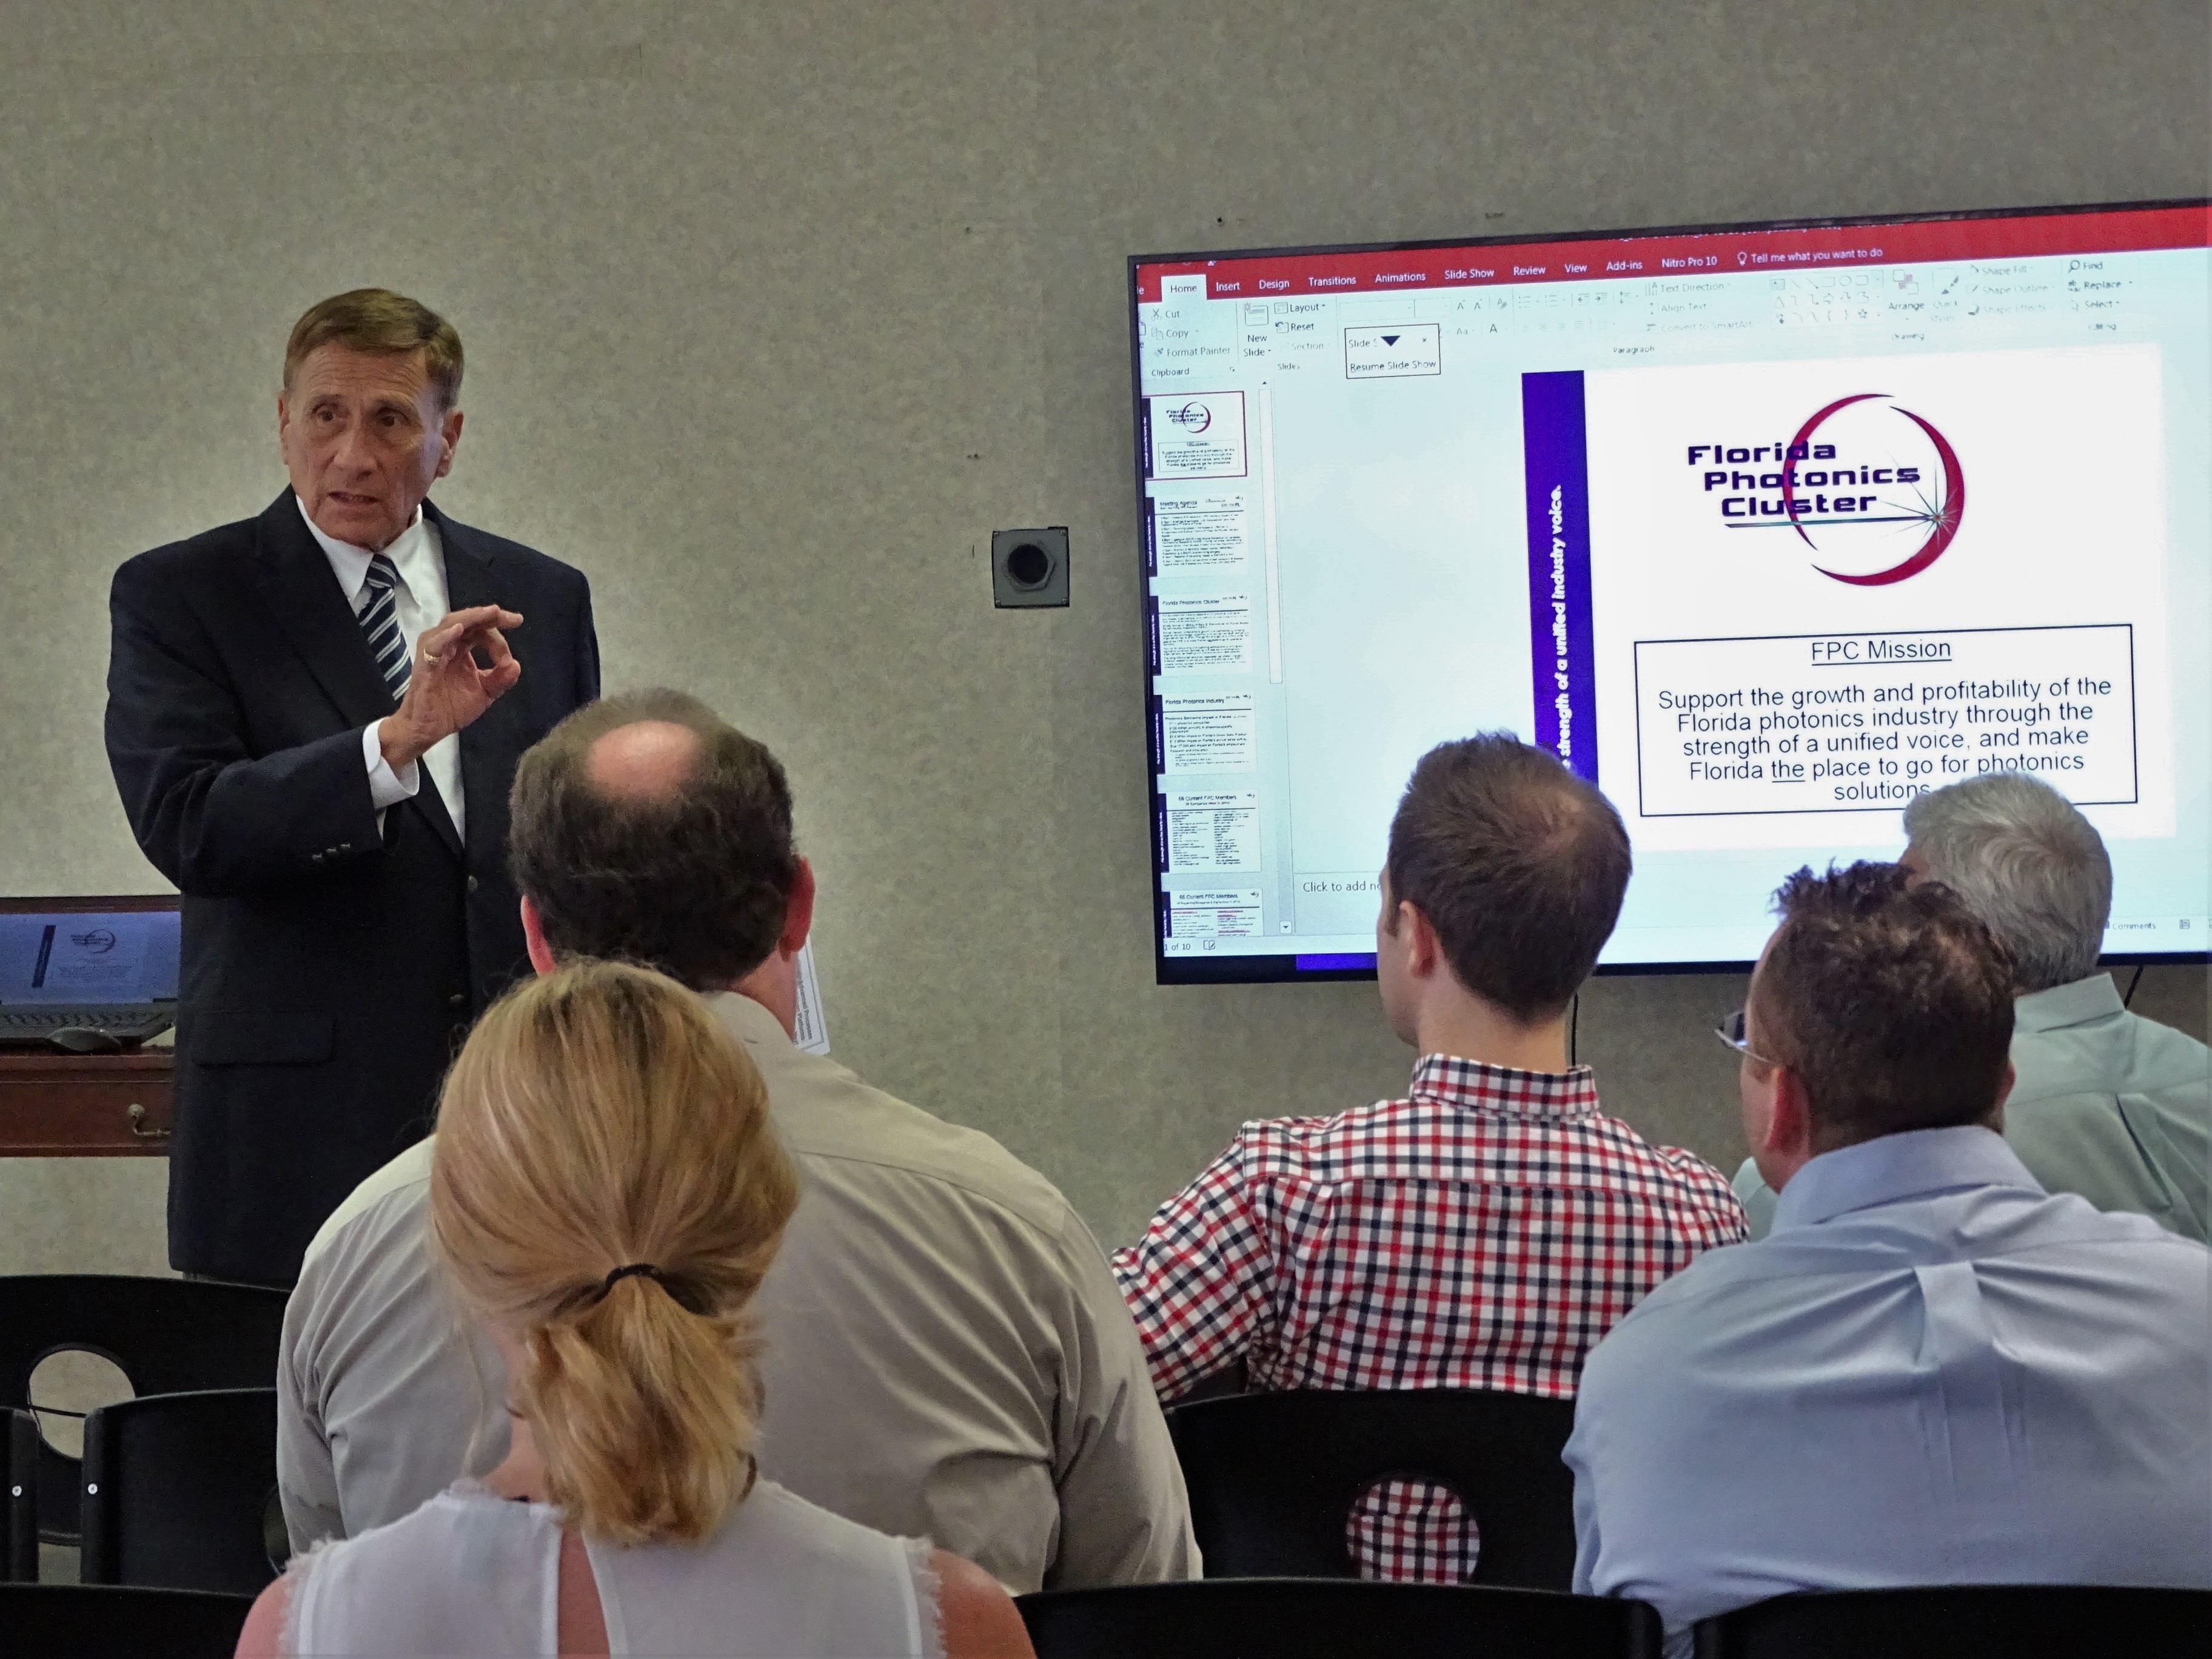 Rep. John Mica (R-FL) speaking at the Florida Photonics Cluster meeting taking place at BEAM Company on June 2, 2016.